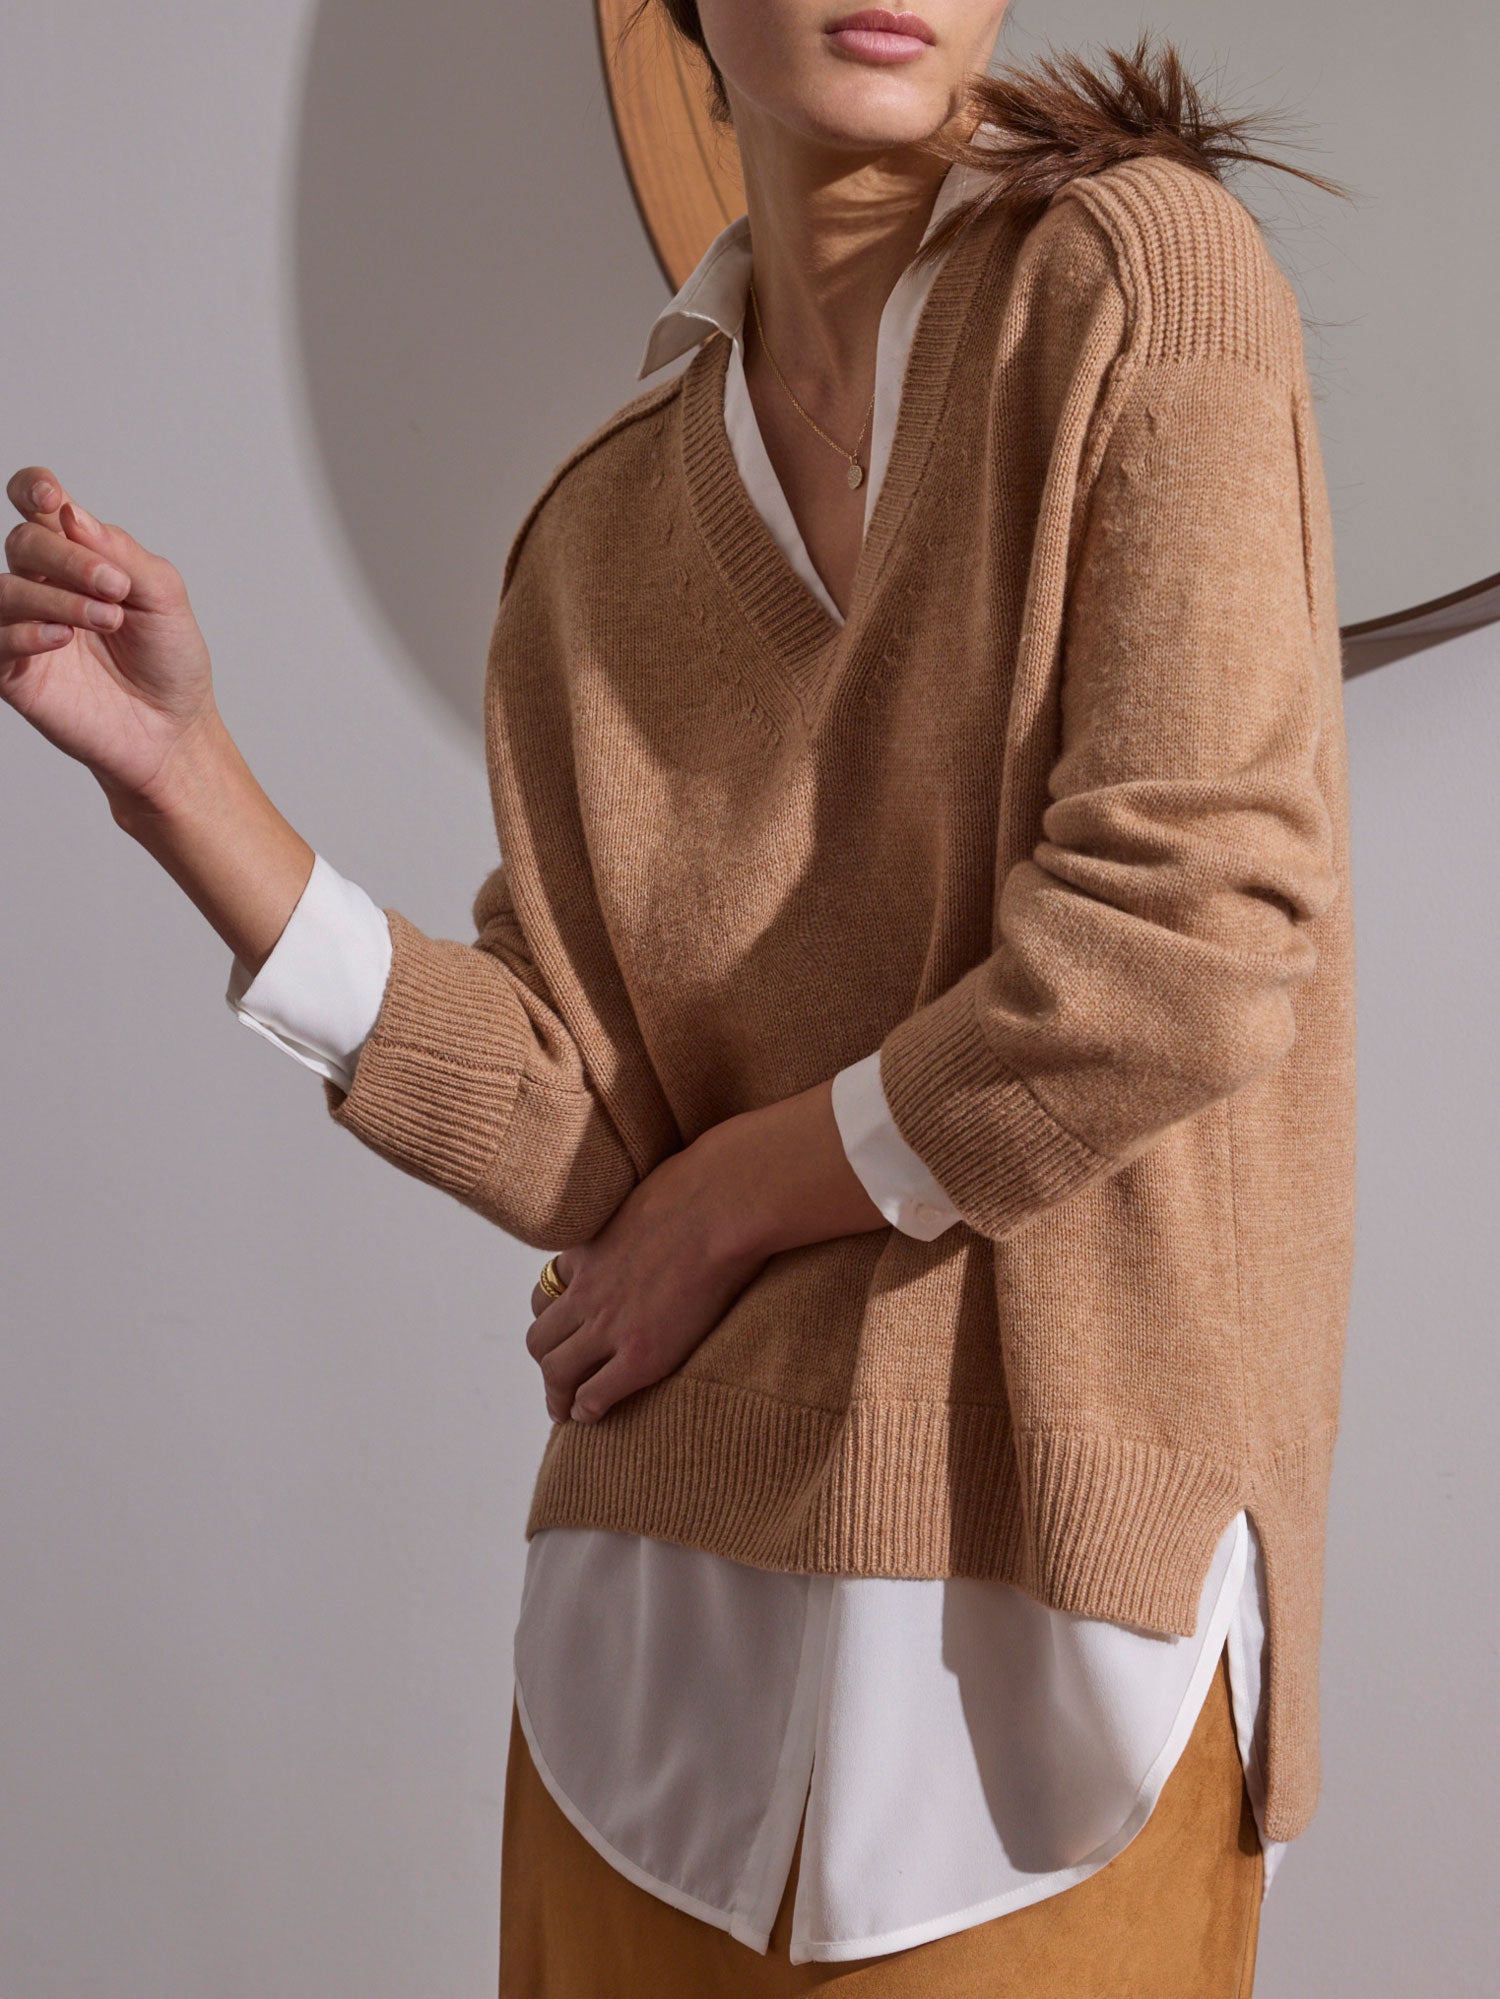 Women's V-neck Layered Pullover Sweater in Camel with White